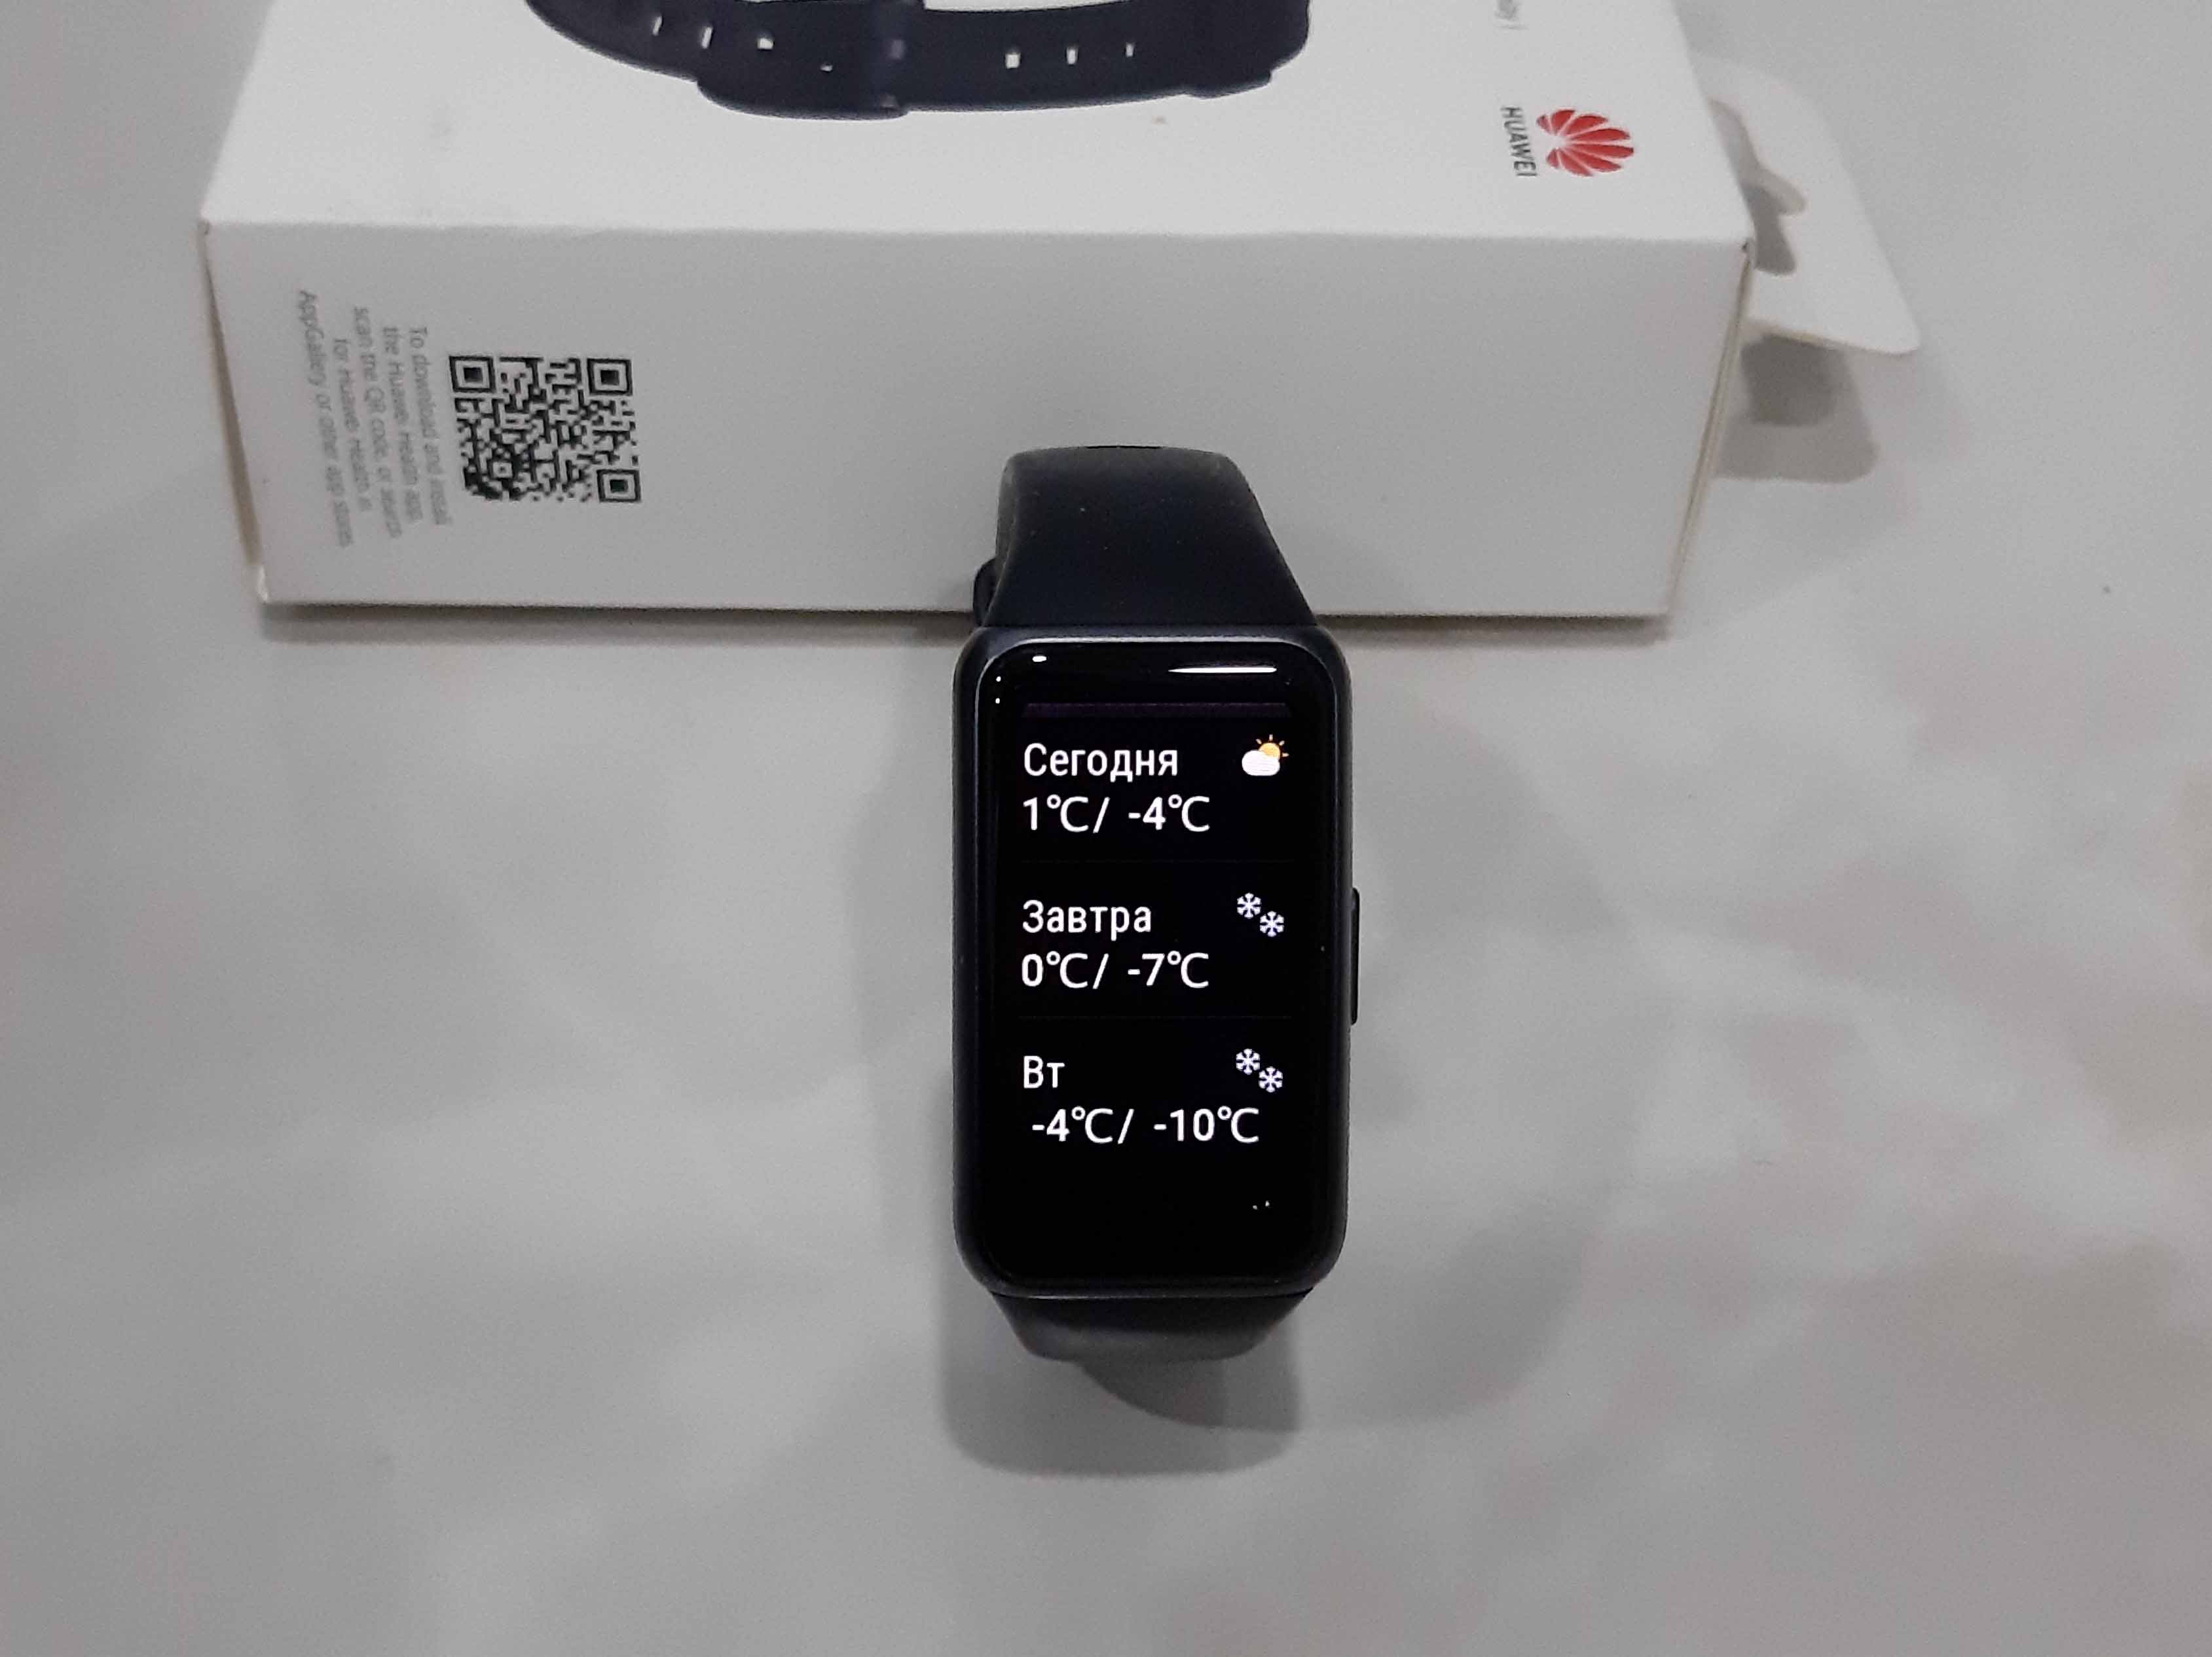 Is the Huawei wristband 6 resistant to water? Does it have the capacity to automatically measure blood oxygen levels and support 96 distinct exercise modes?